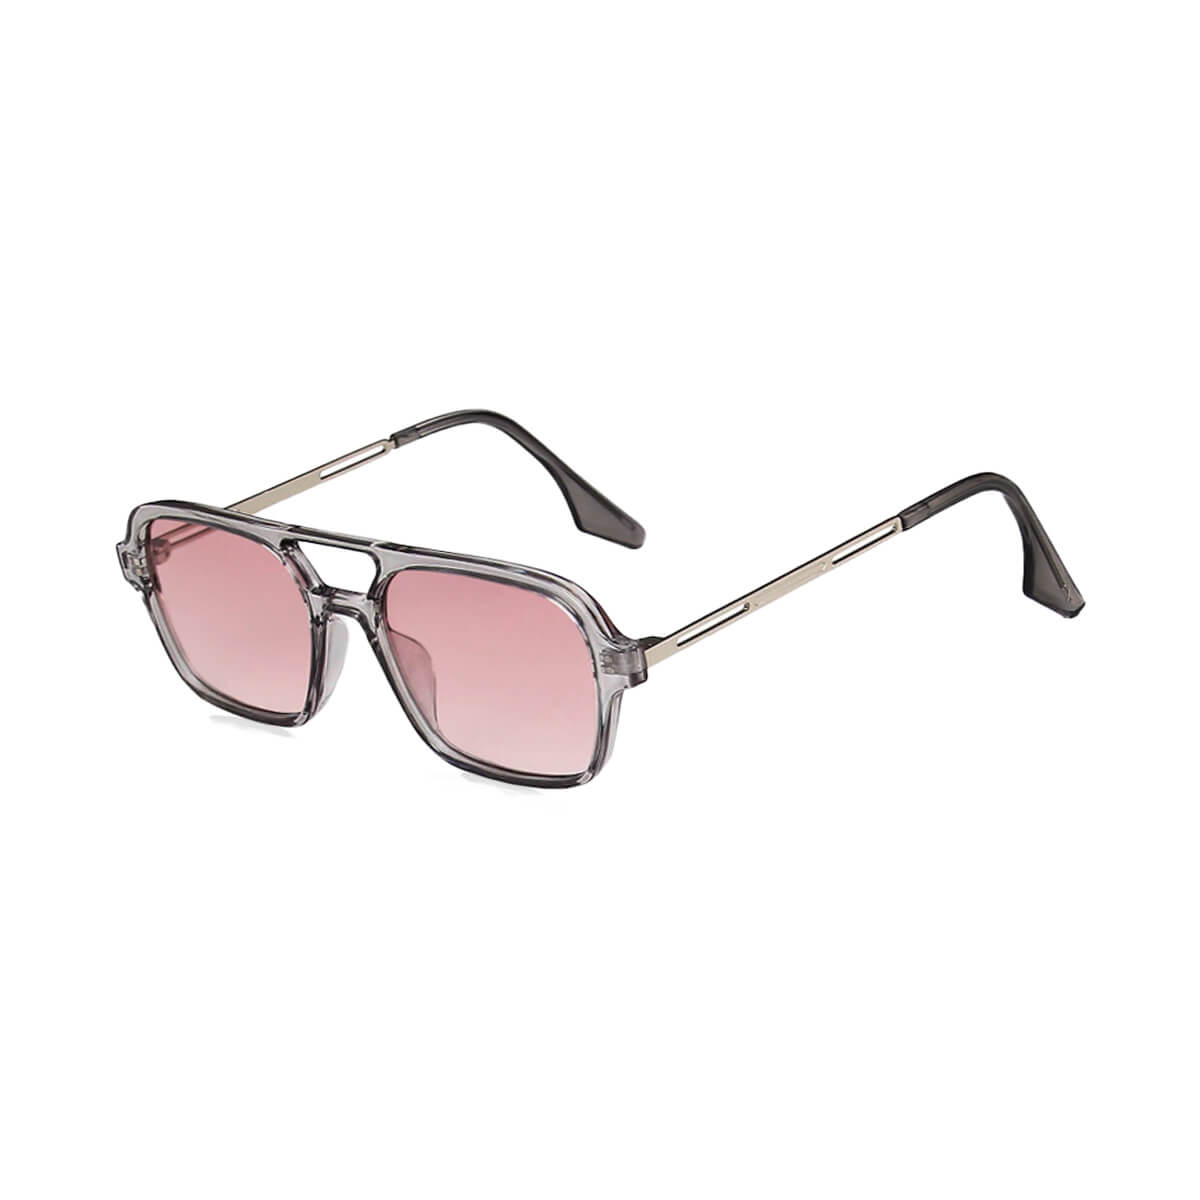 Wide Aviator Sunglasses with Pink Lens Front